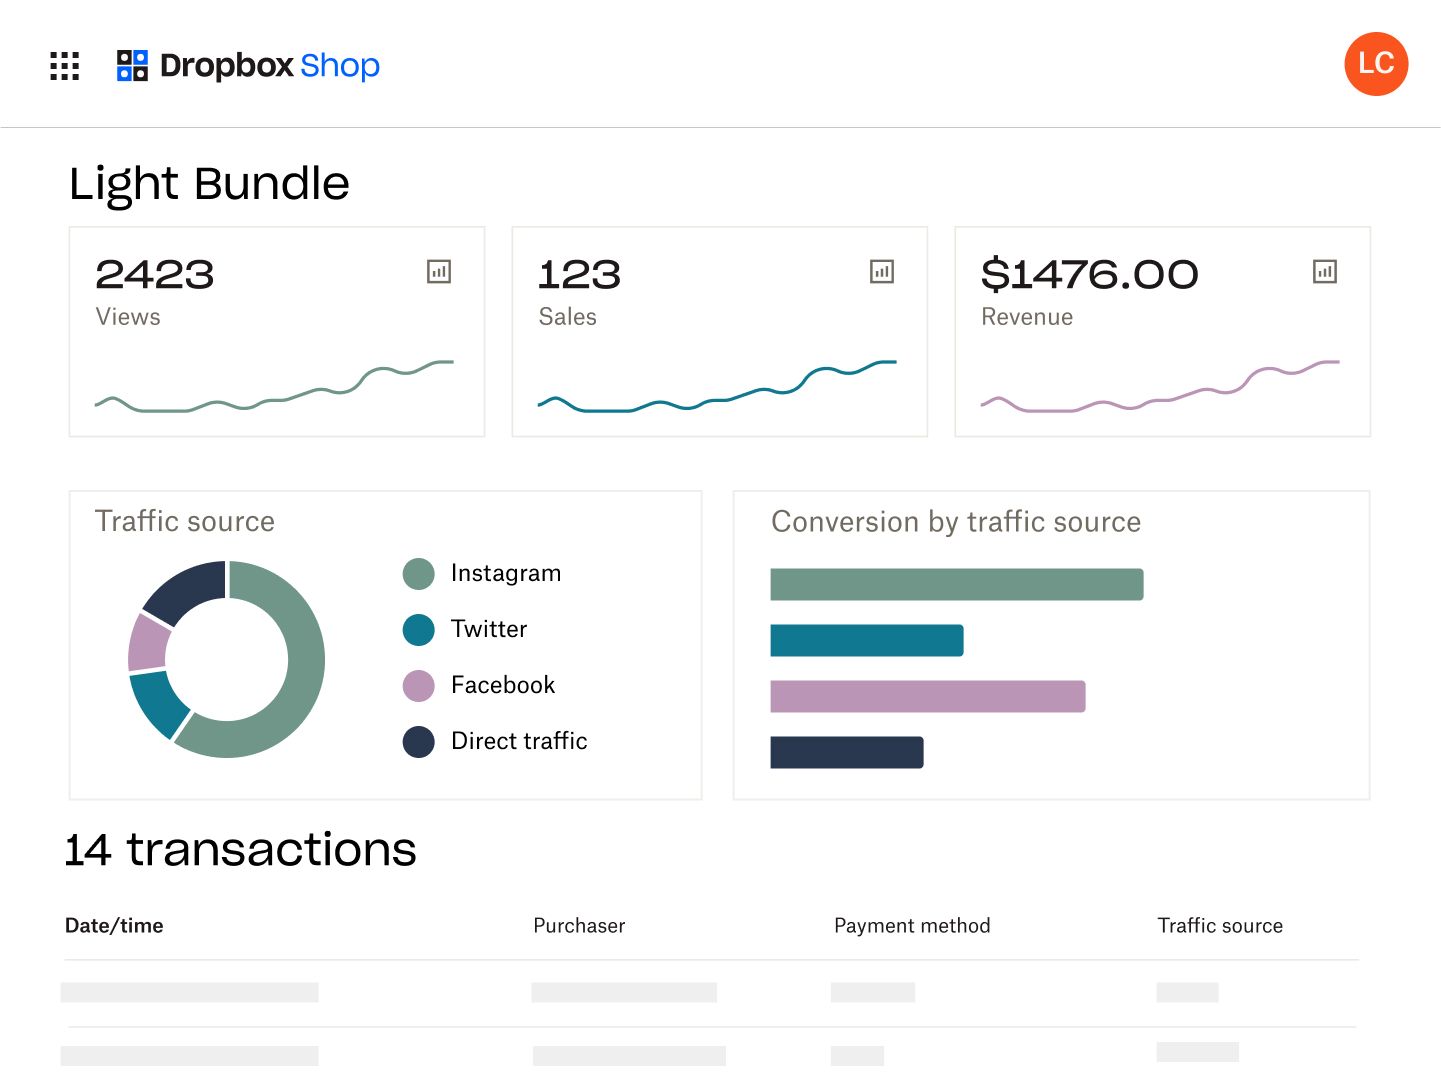 Charts and graphs display views, revenue, traffic source, and number of sales for an item in a user’s Dropbox Shop storefront